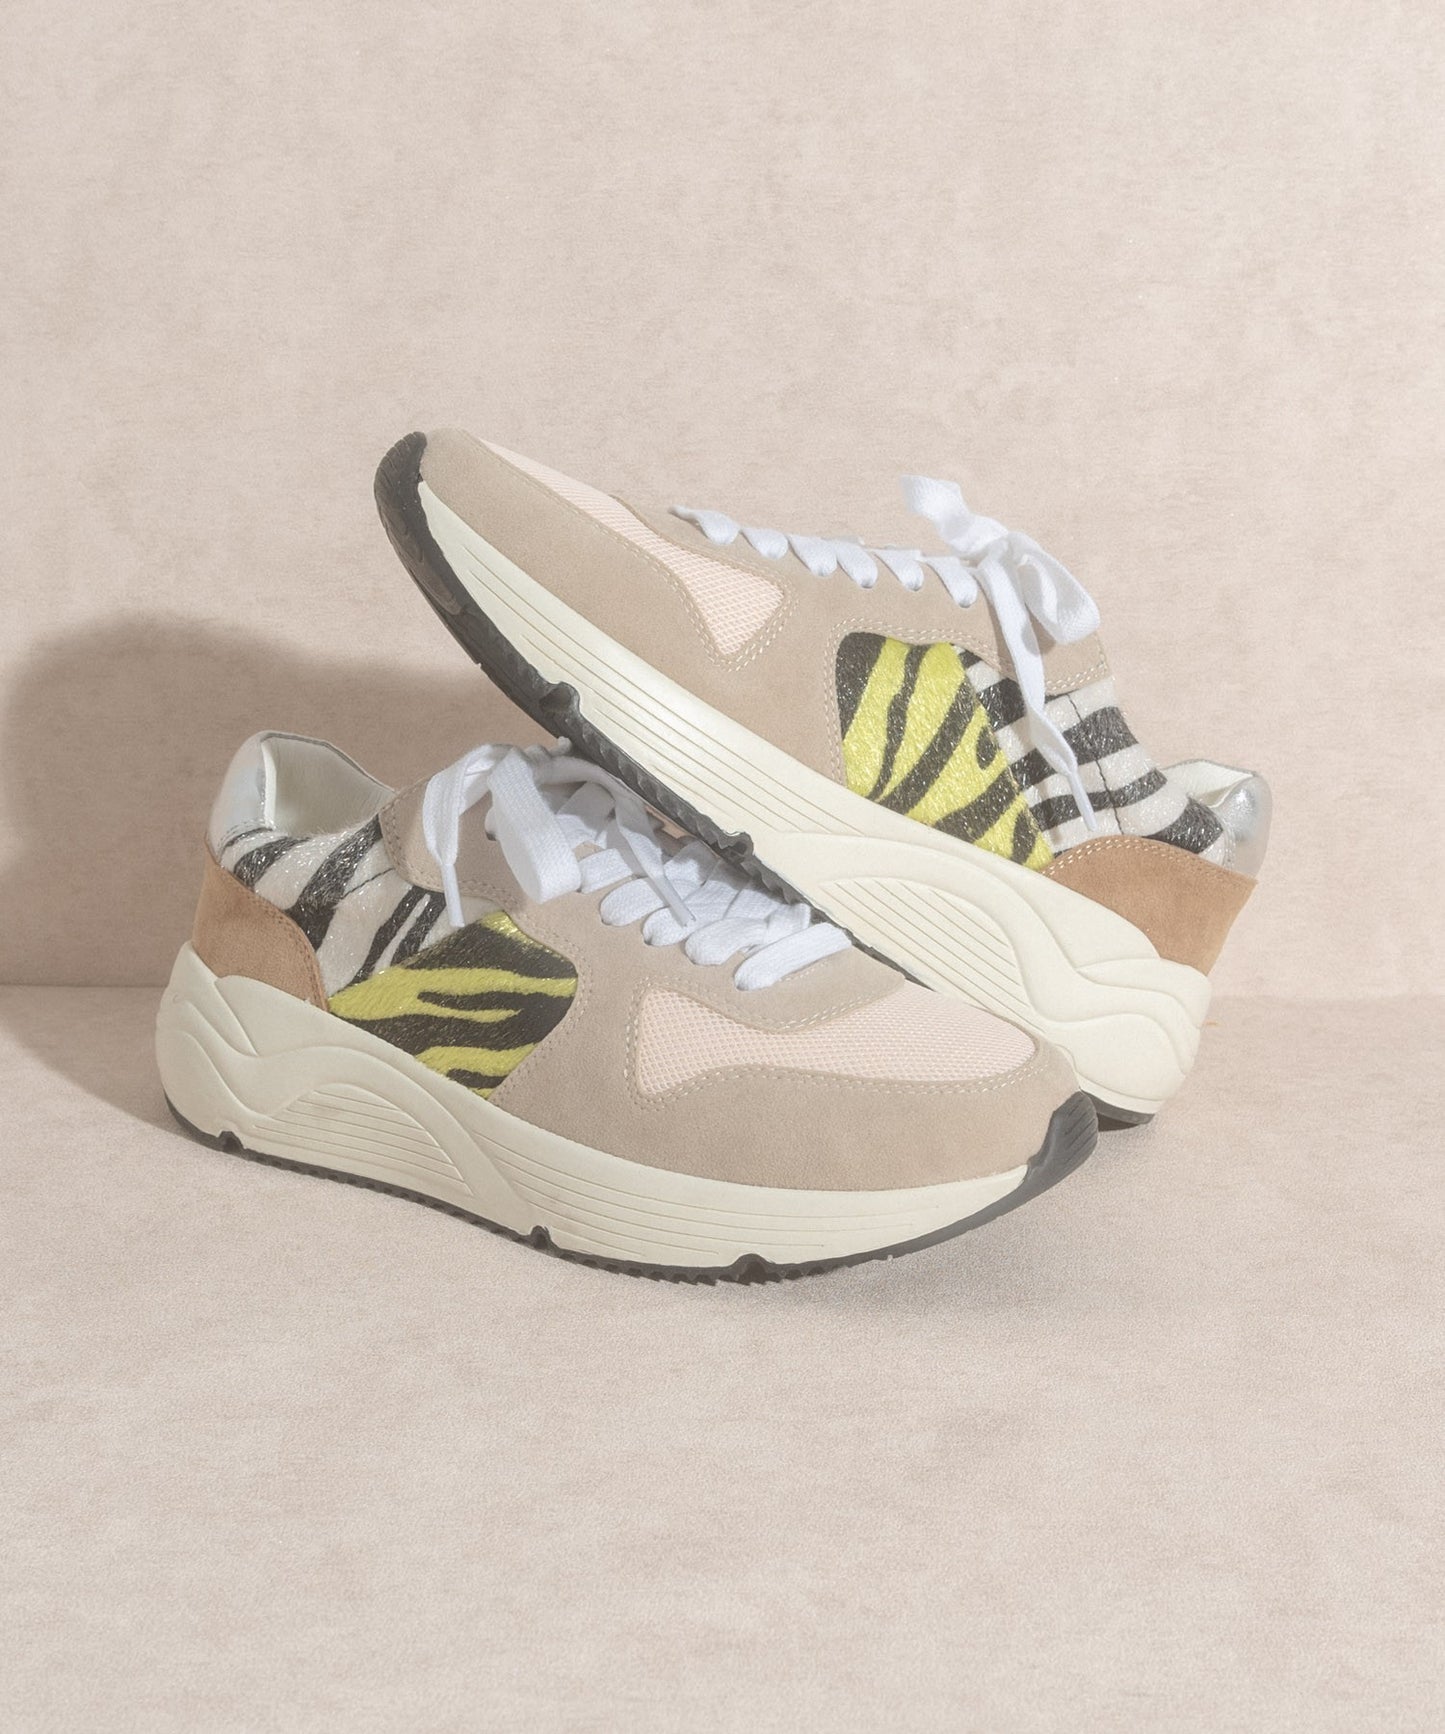 BOUTQUE-Tiger Sneakers